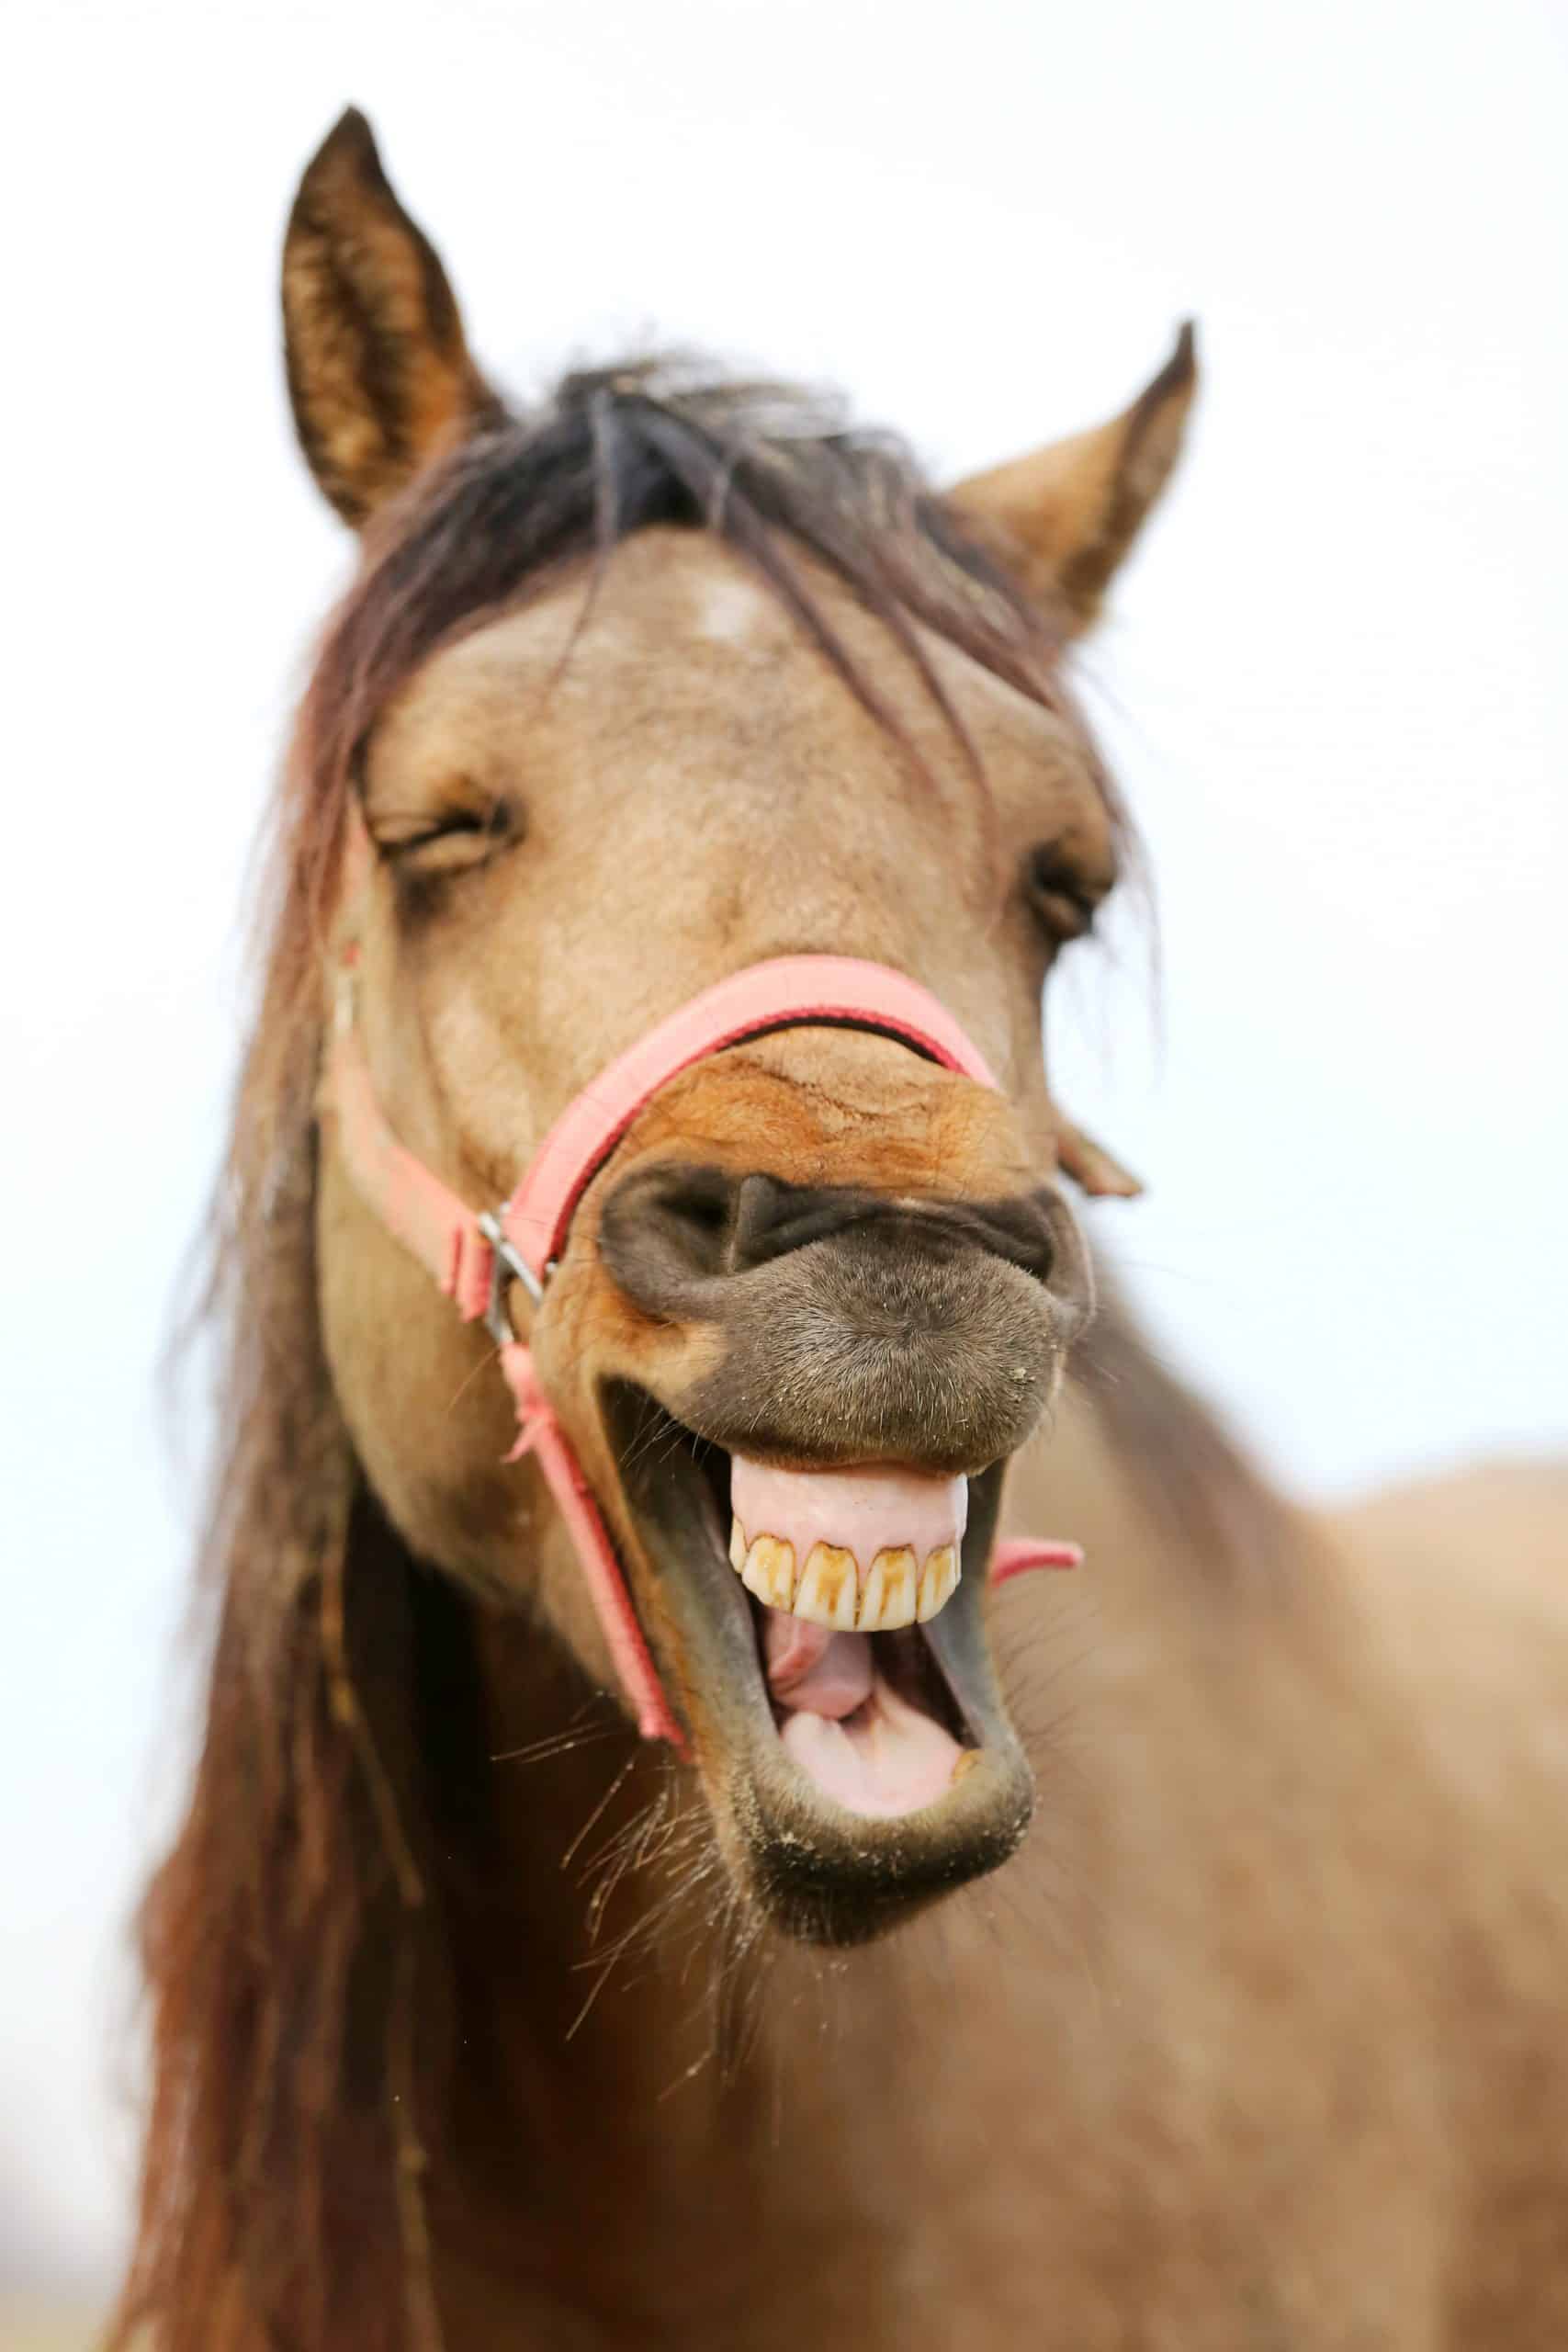 Funny horse head closeup of young mare smiling and laughing with large teeth. Selective focus on the teeth and nose